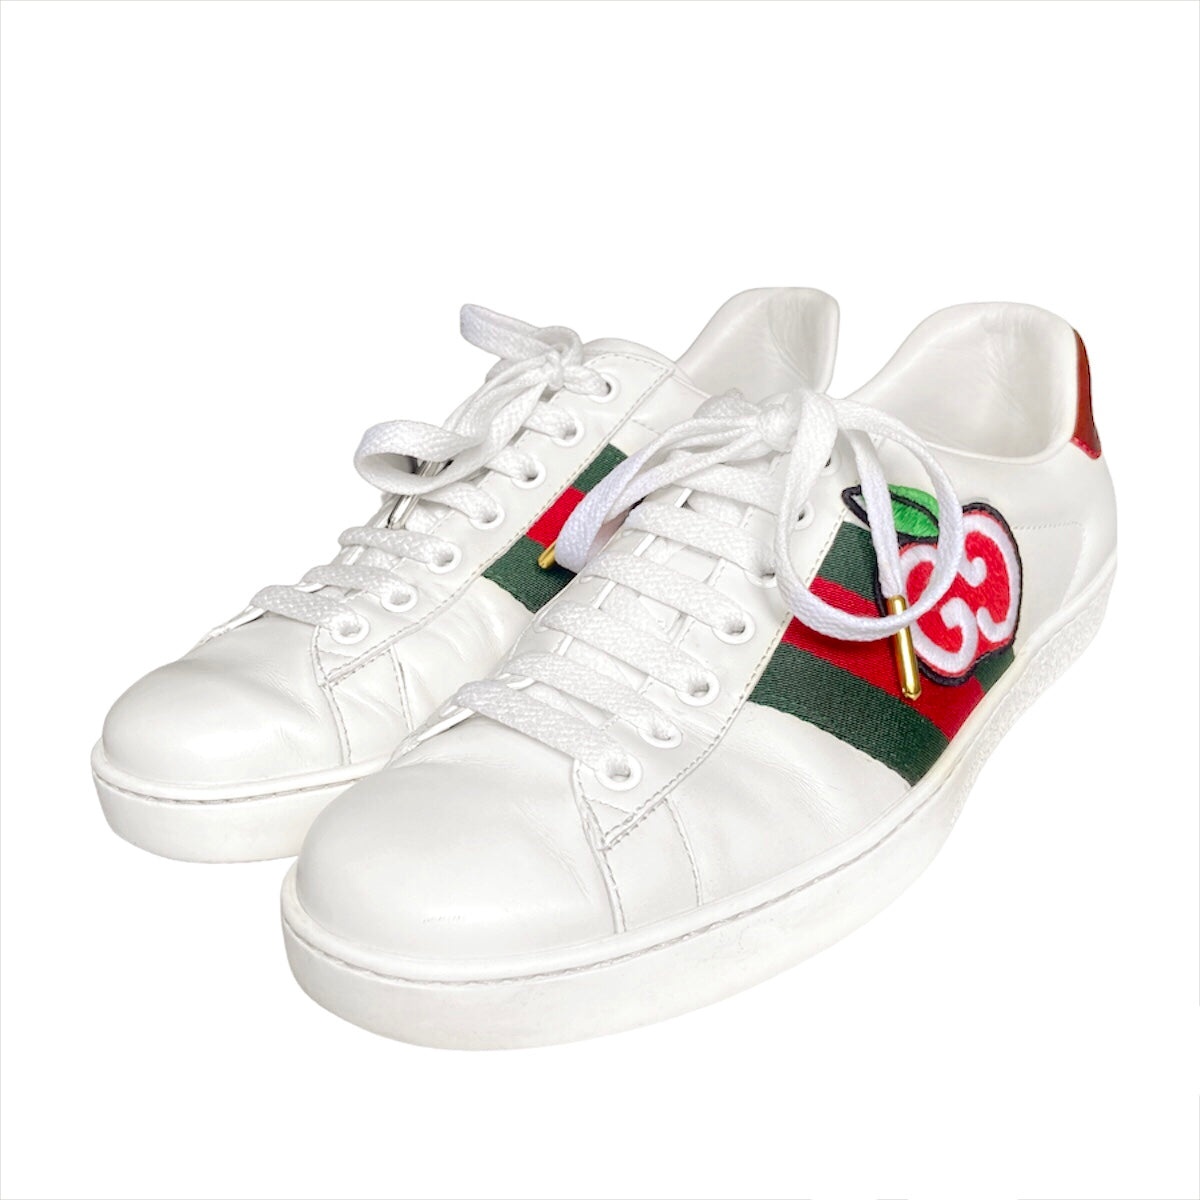 Gucci cherry ace sneakers 37.5 - 1